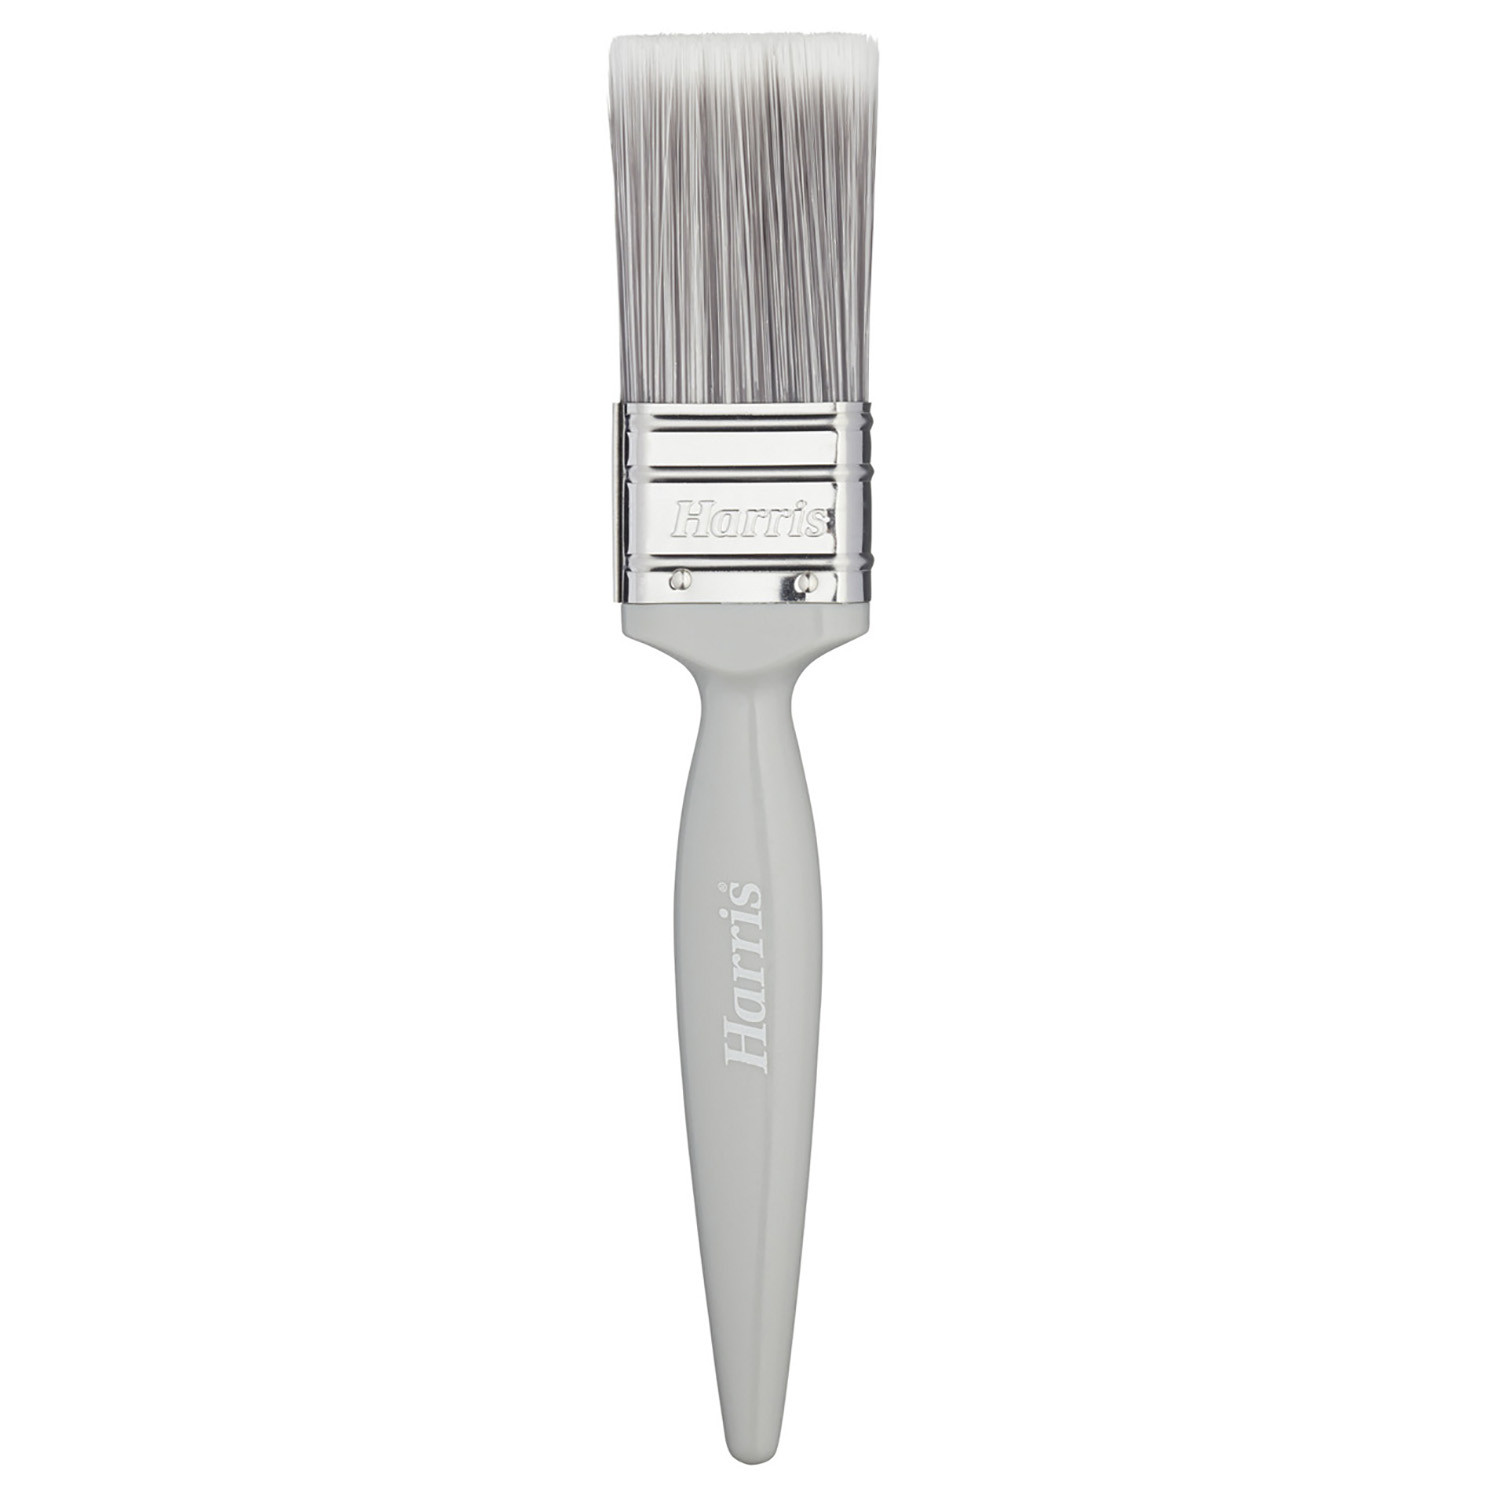 Harris 1.5 inch Essentials Walls and Ceilings Paint Brush Image 2